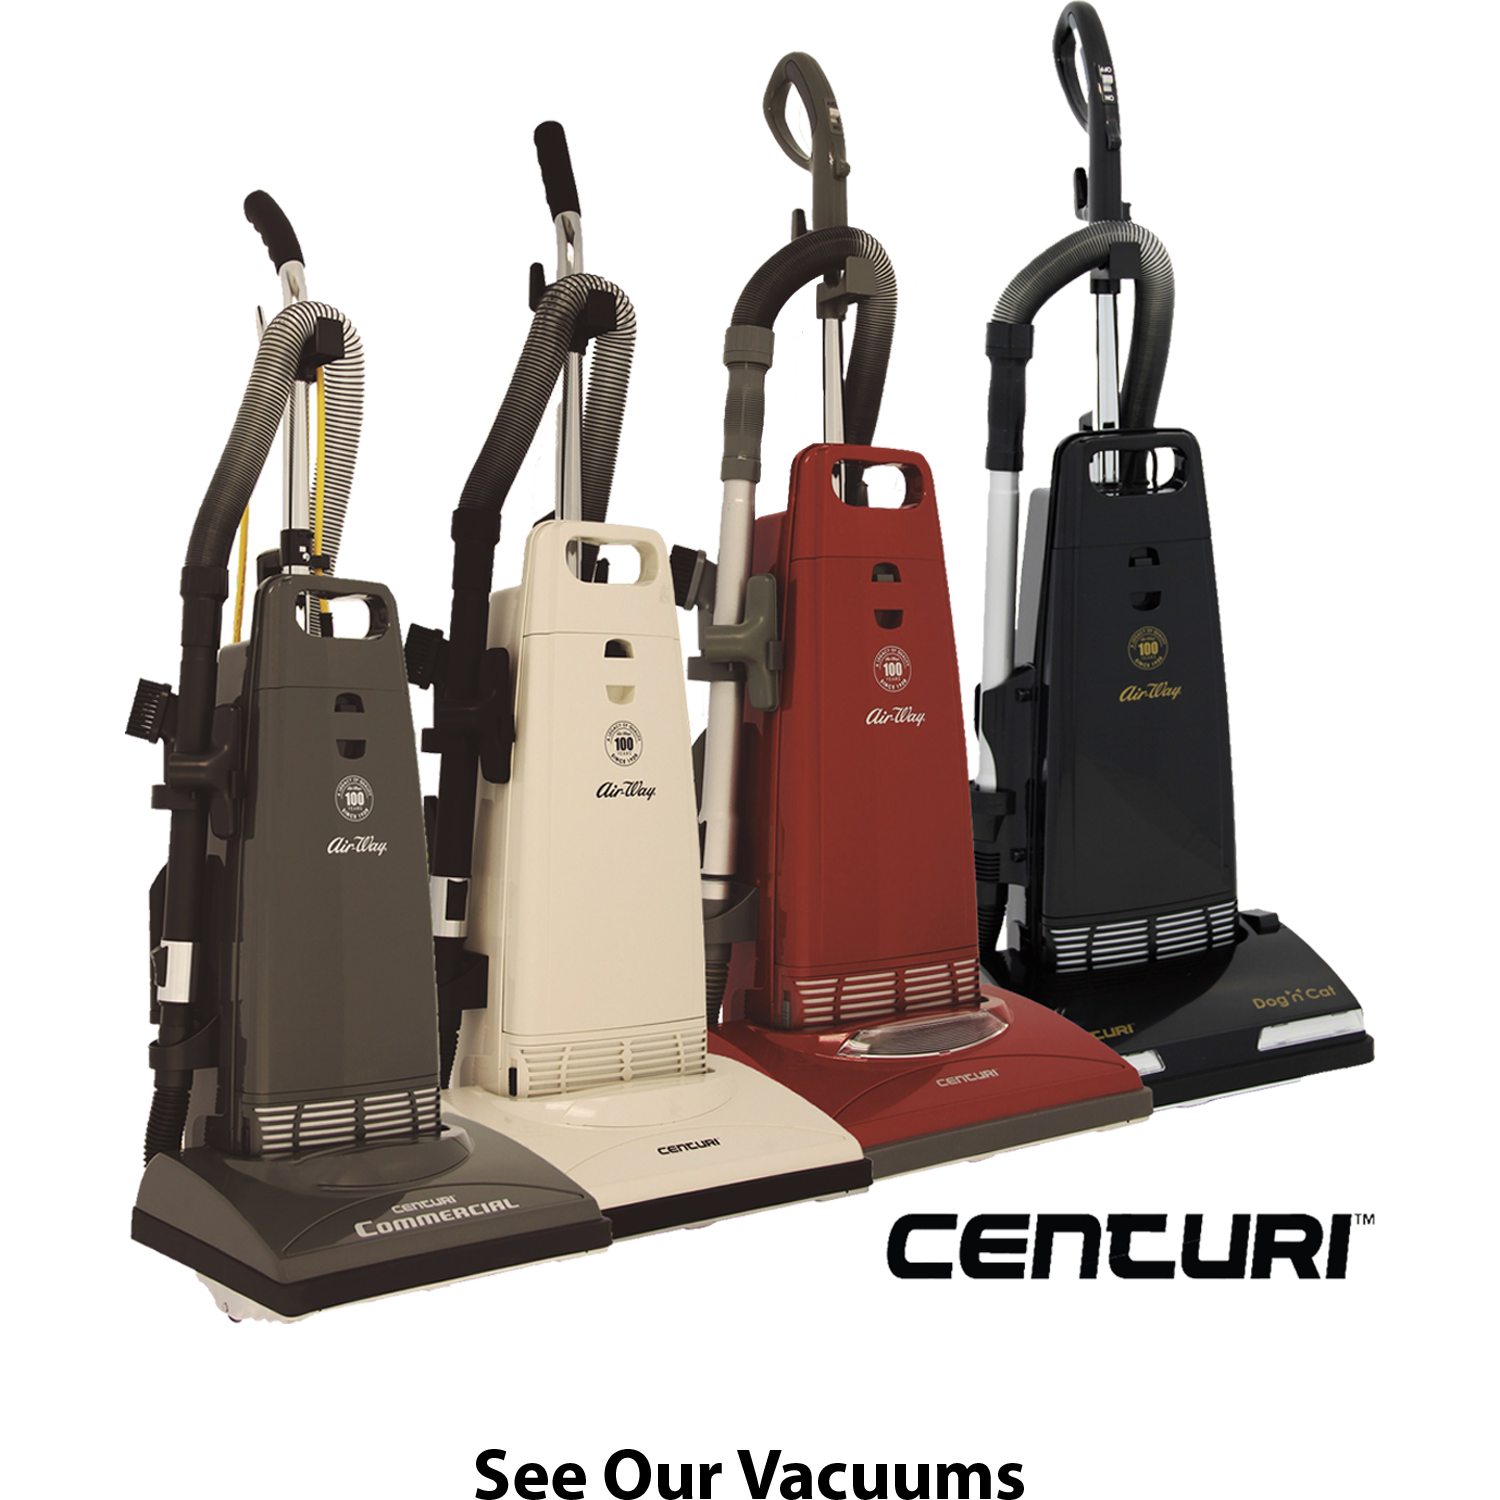 Check Out Our Selection of Upright Vacuums!